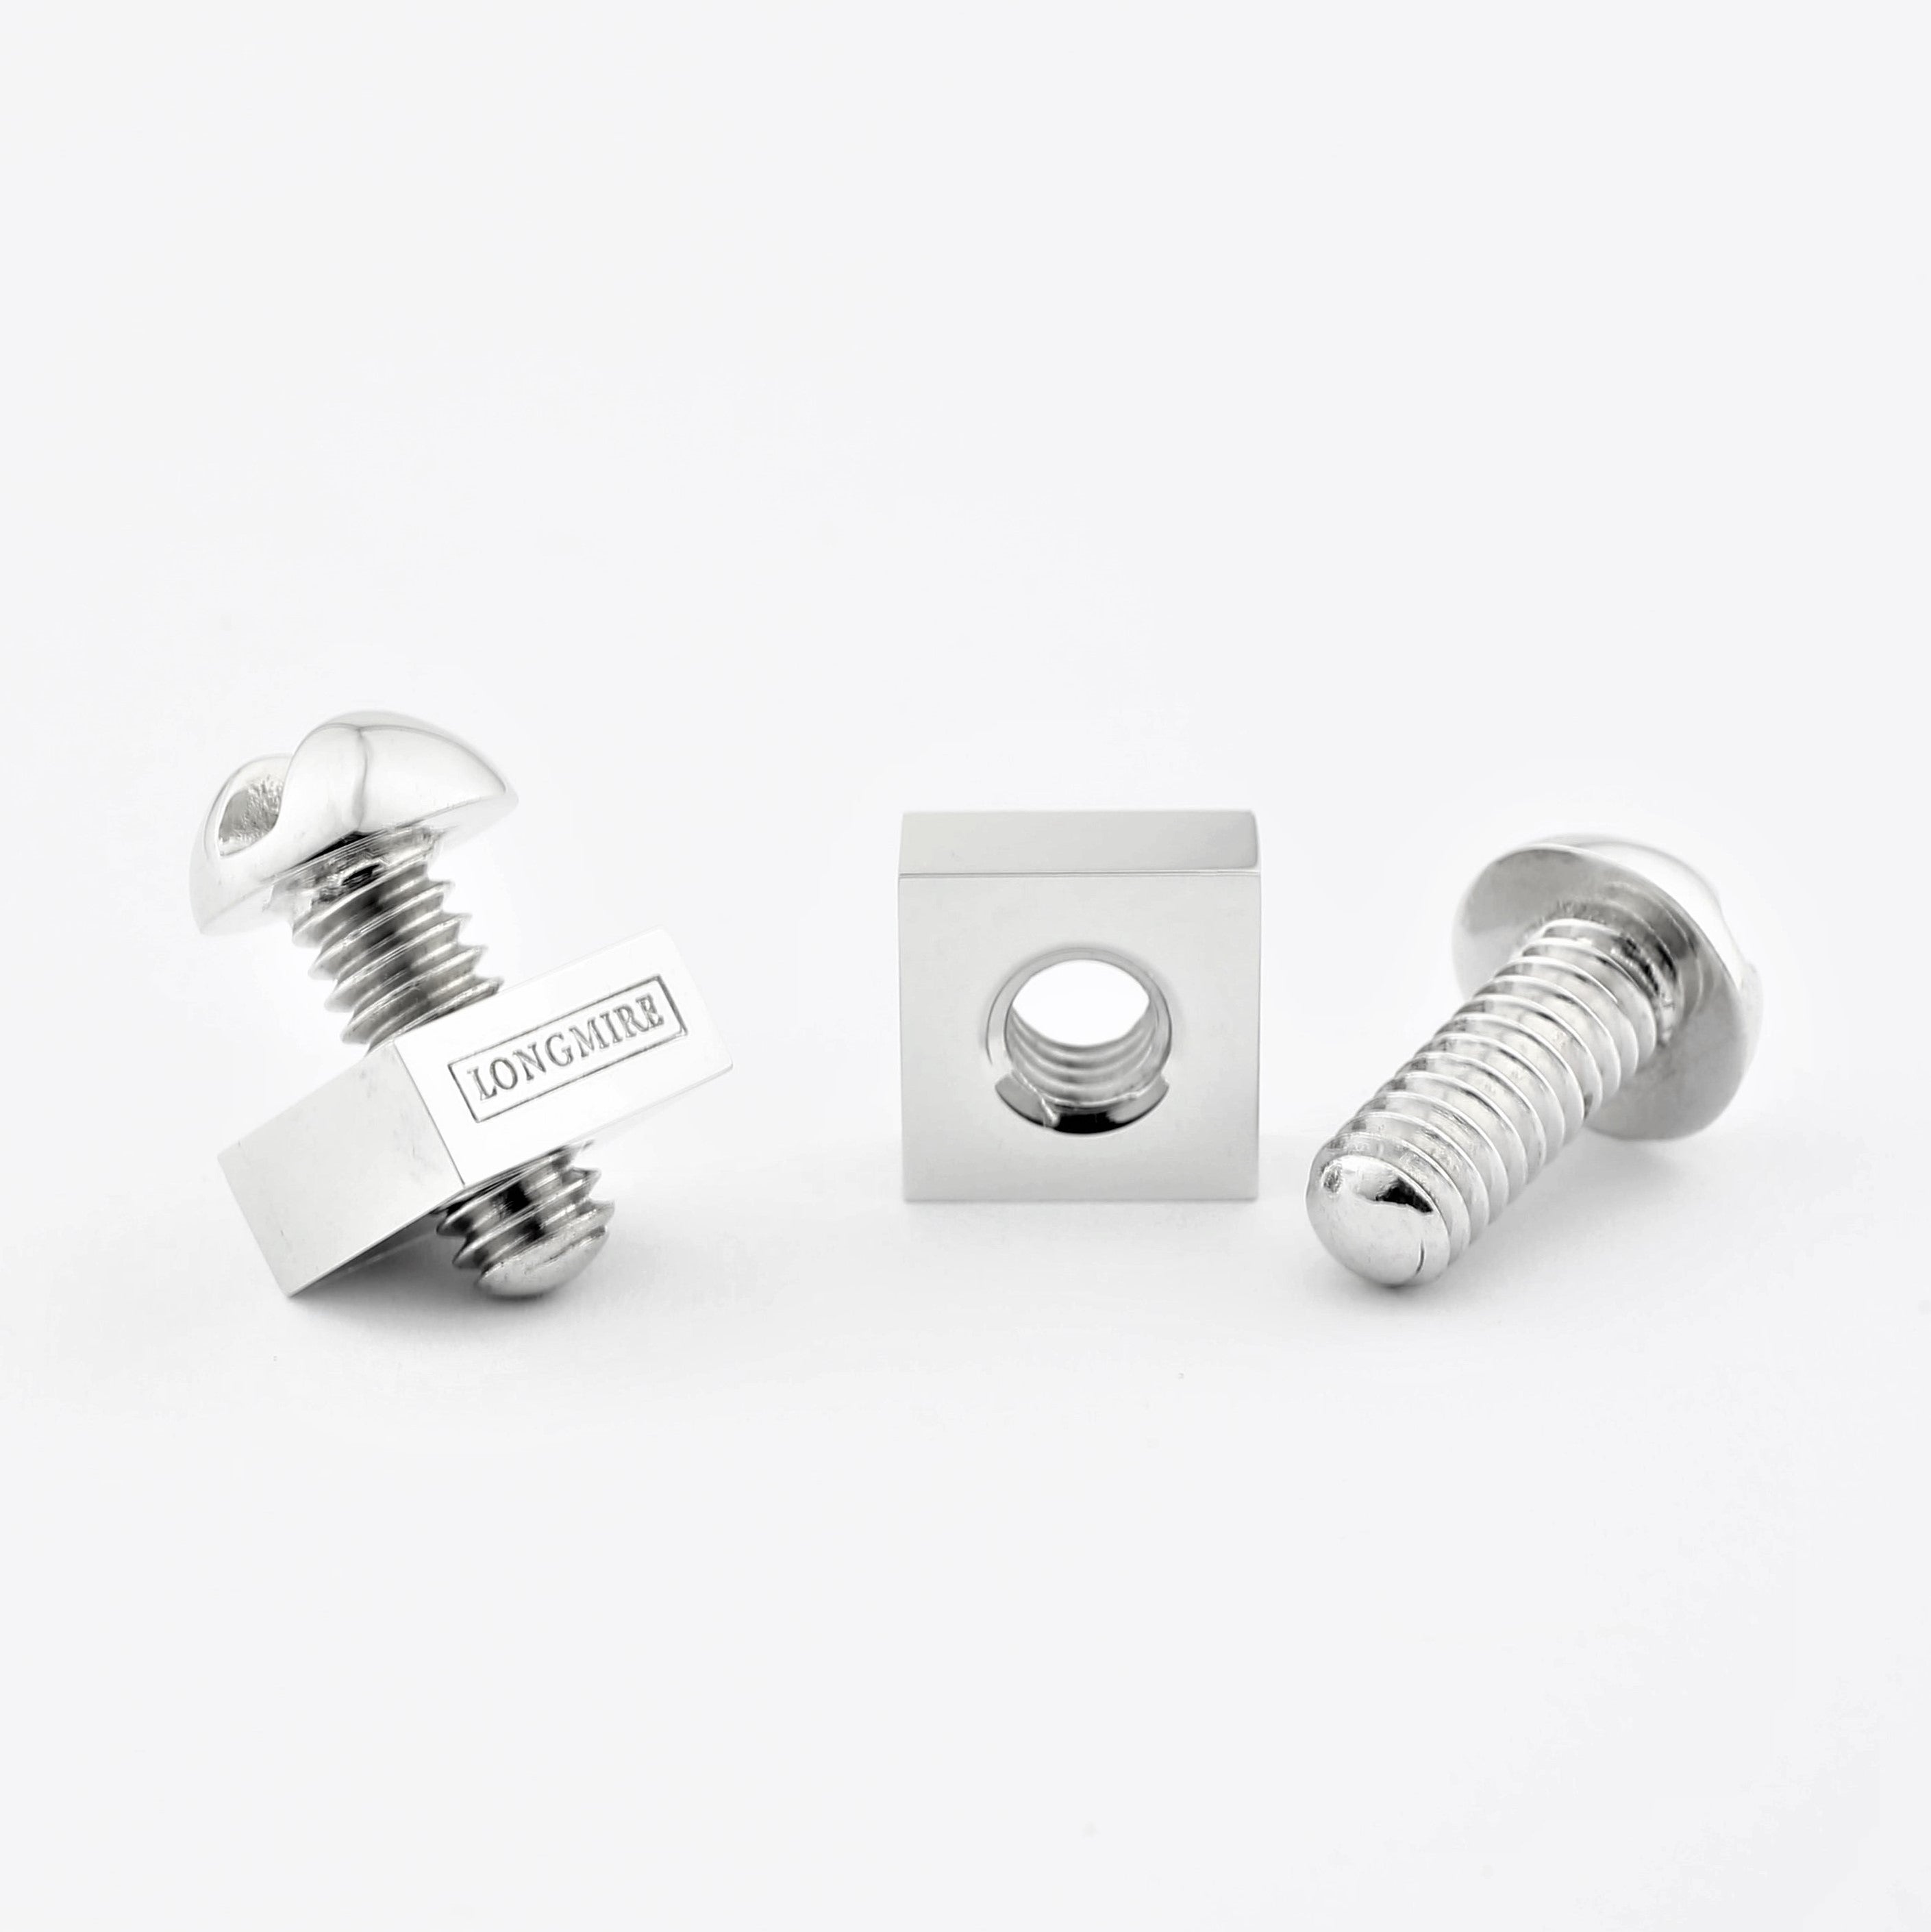 Nut and bolt cufflinks in silver - pair